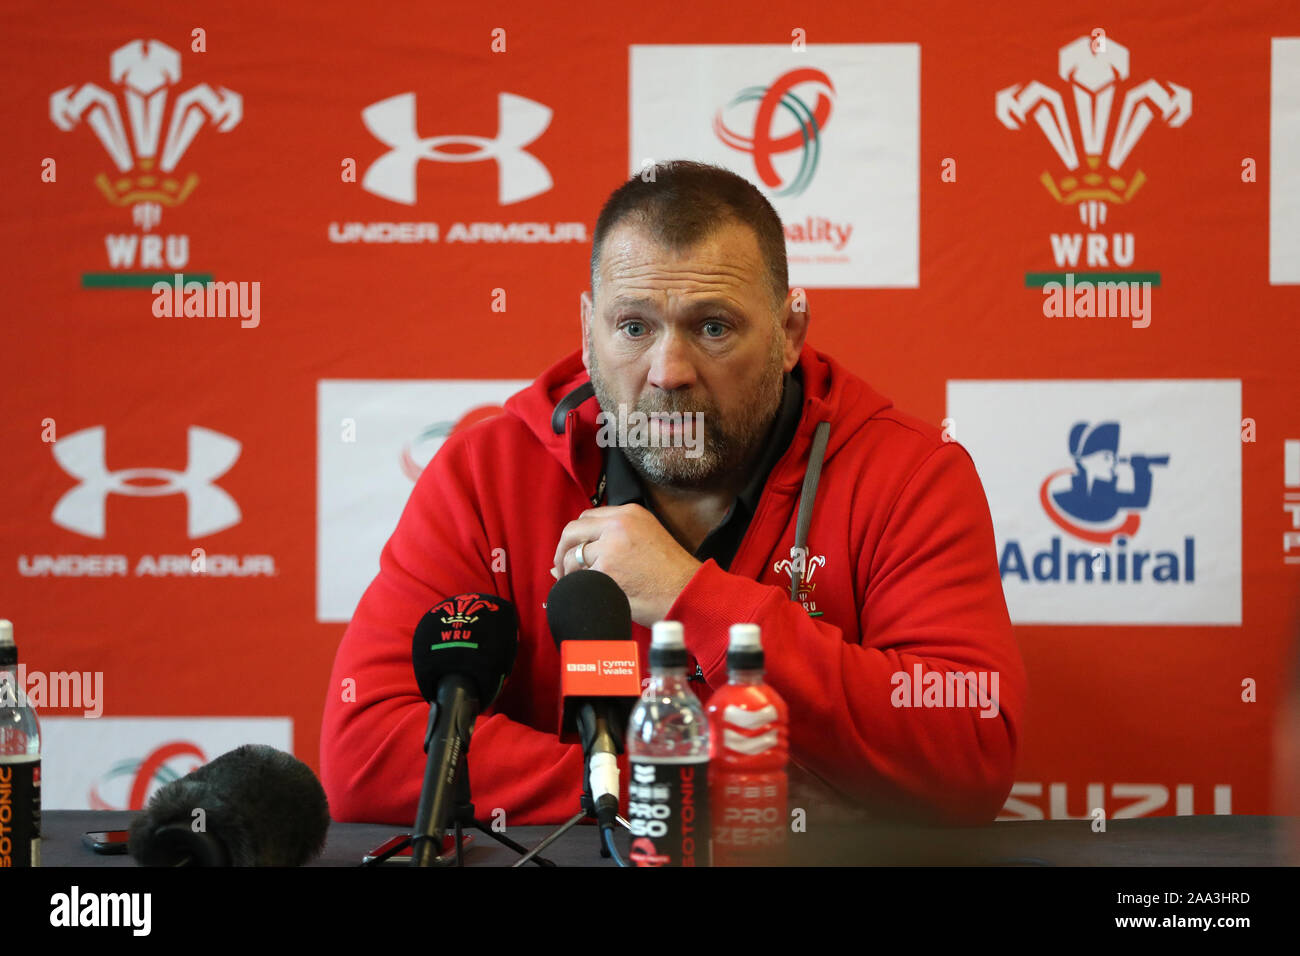 Cardiff, UK. 19th Nov, 2019. Jonathan Humphreys, the new assistant coach of Wales rugby teams speaks to the media. Wales rugby squad announcement press conference at the Vale Resort, Hensol, near Cardiff, South Wales on Tuesday 19th November 2019. The team are preparing for their match against the Barbarians at the end of November. pic by Andrew Orchard/Alamy Live News Stock Photo